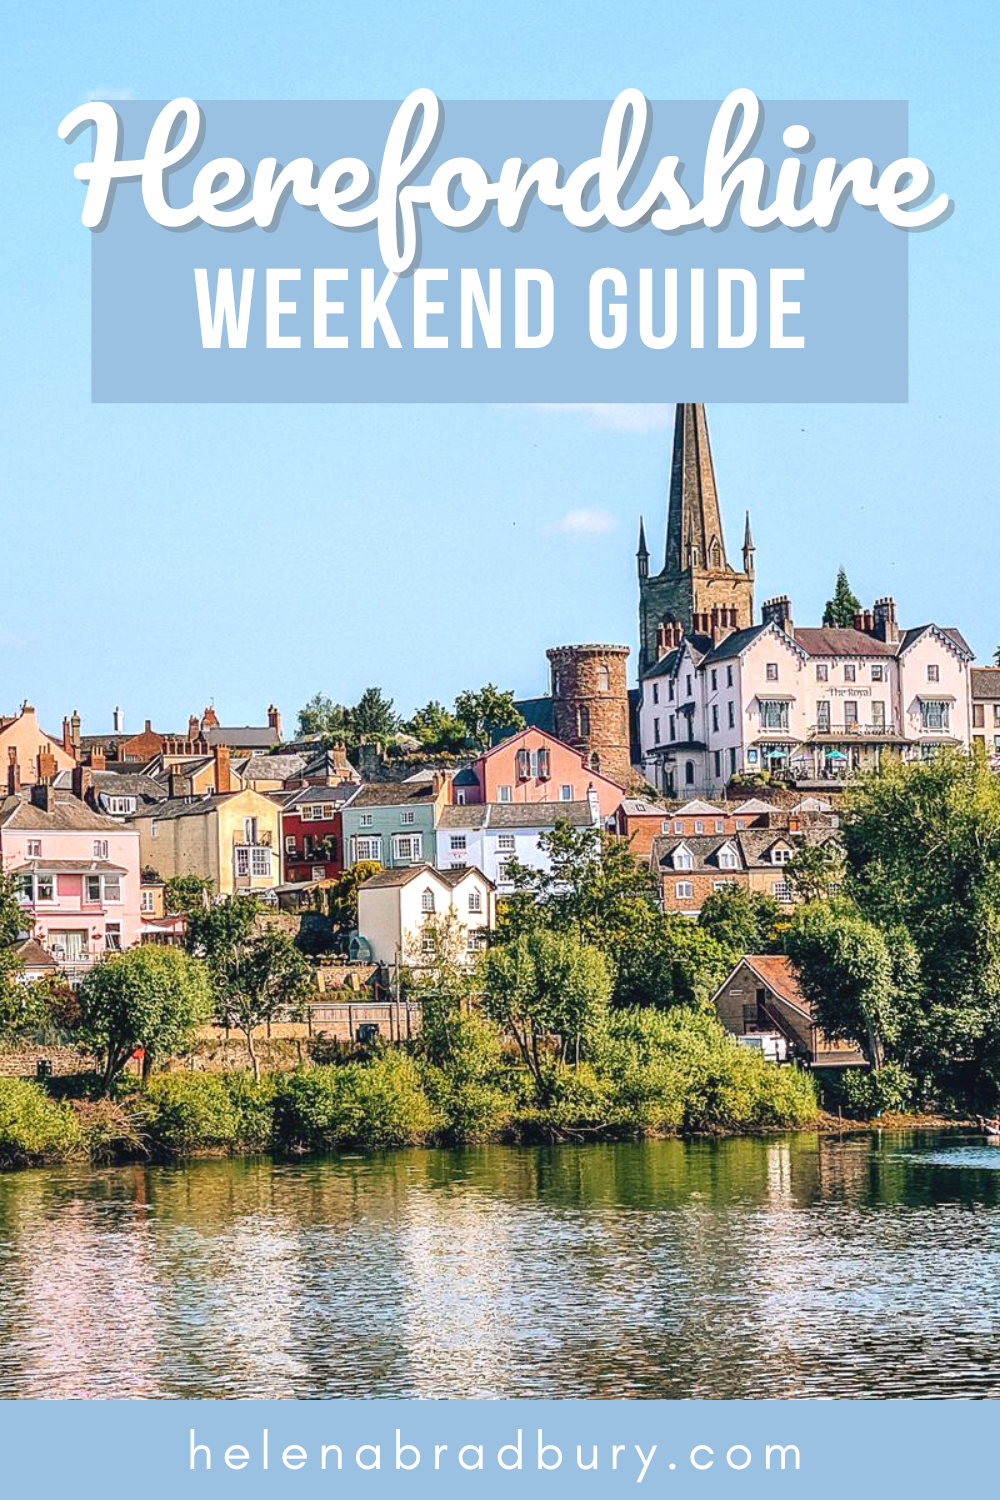 Use this weekend in Herefordshire itinerary to plan your trip and discover things to do in Herefordshire so you can experience what this amazing county has to offer. | herefordshire countryside | herefordshire england | hereford things to do | thing…